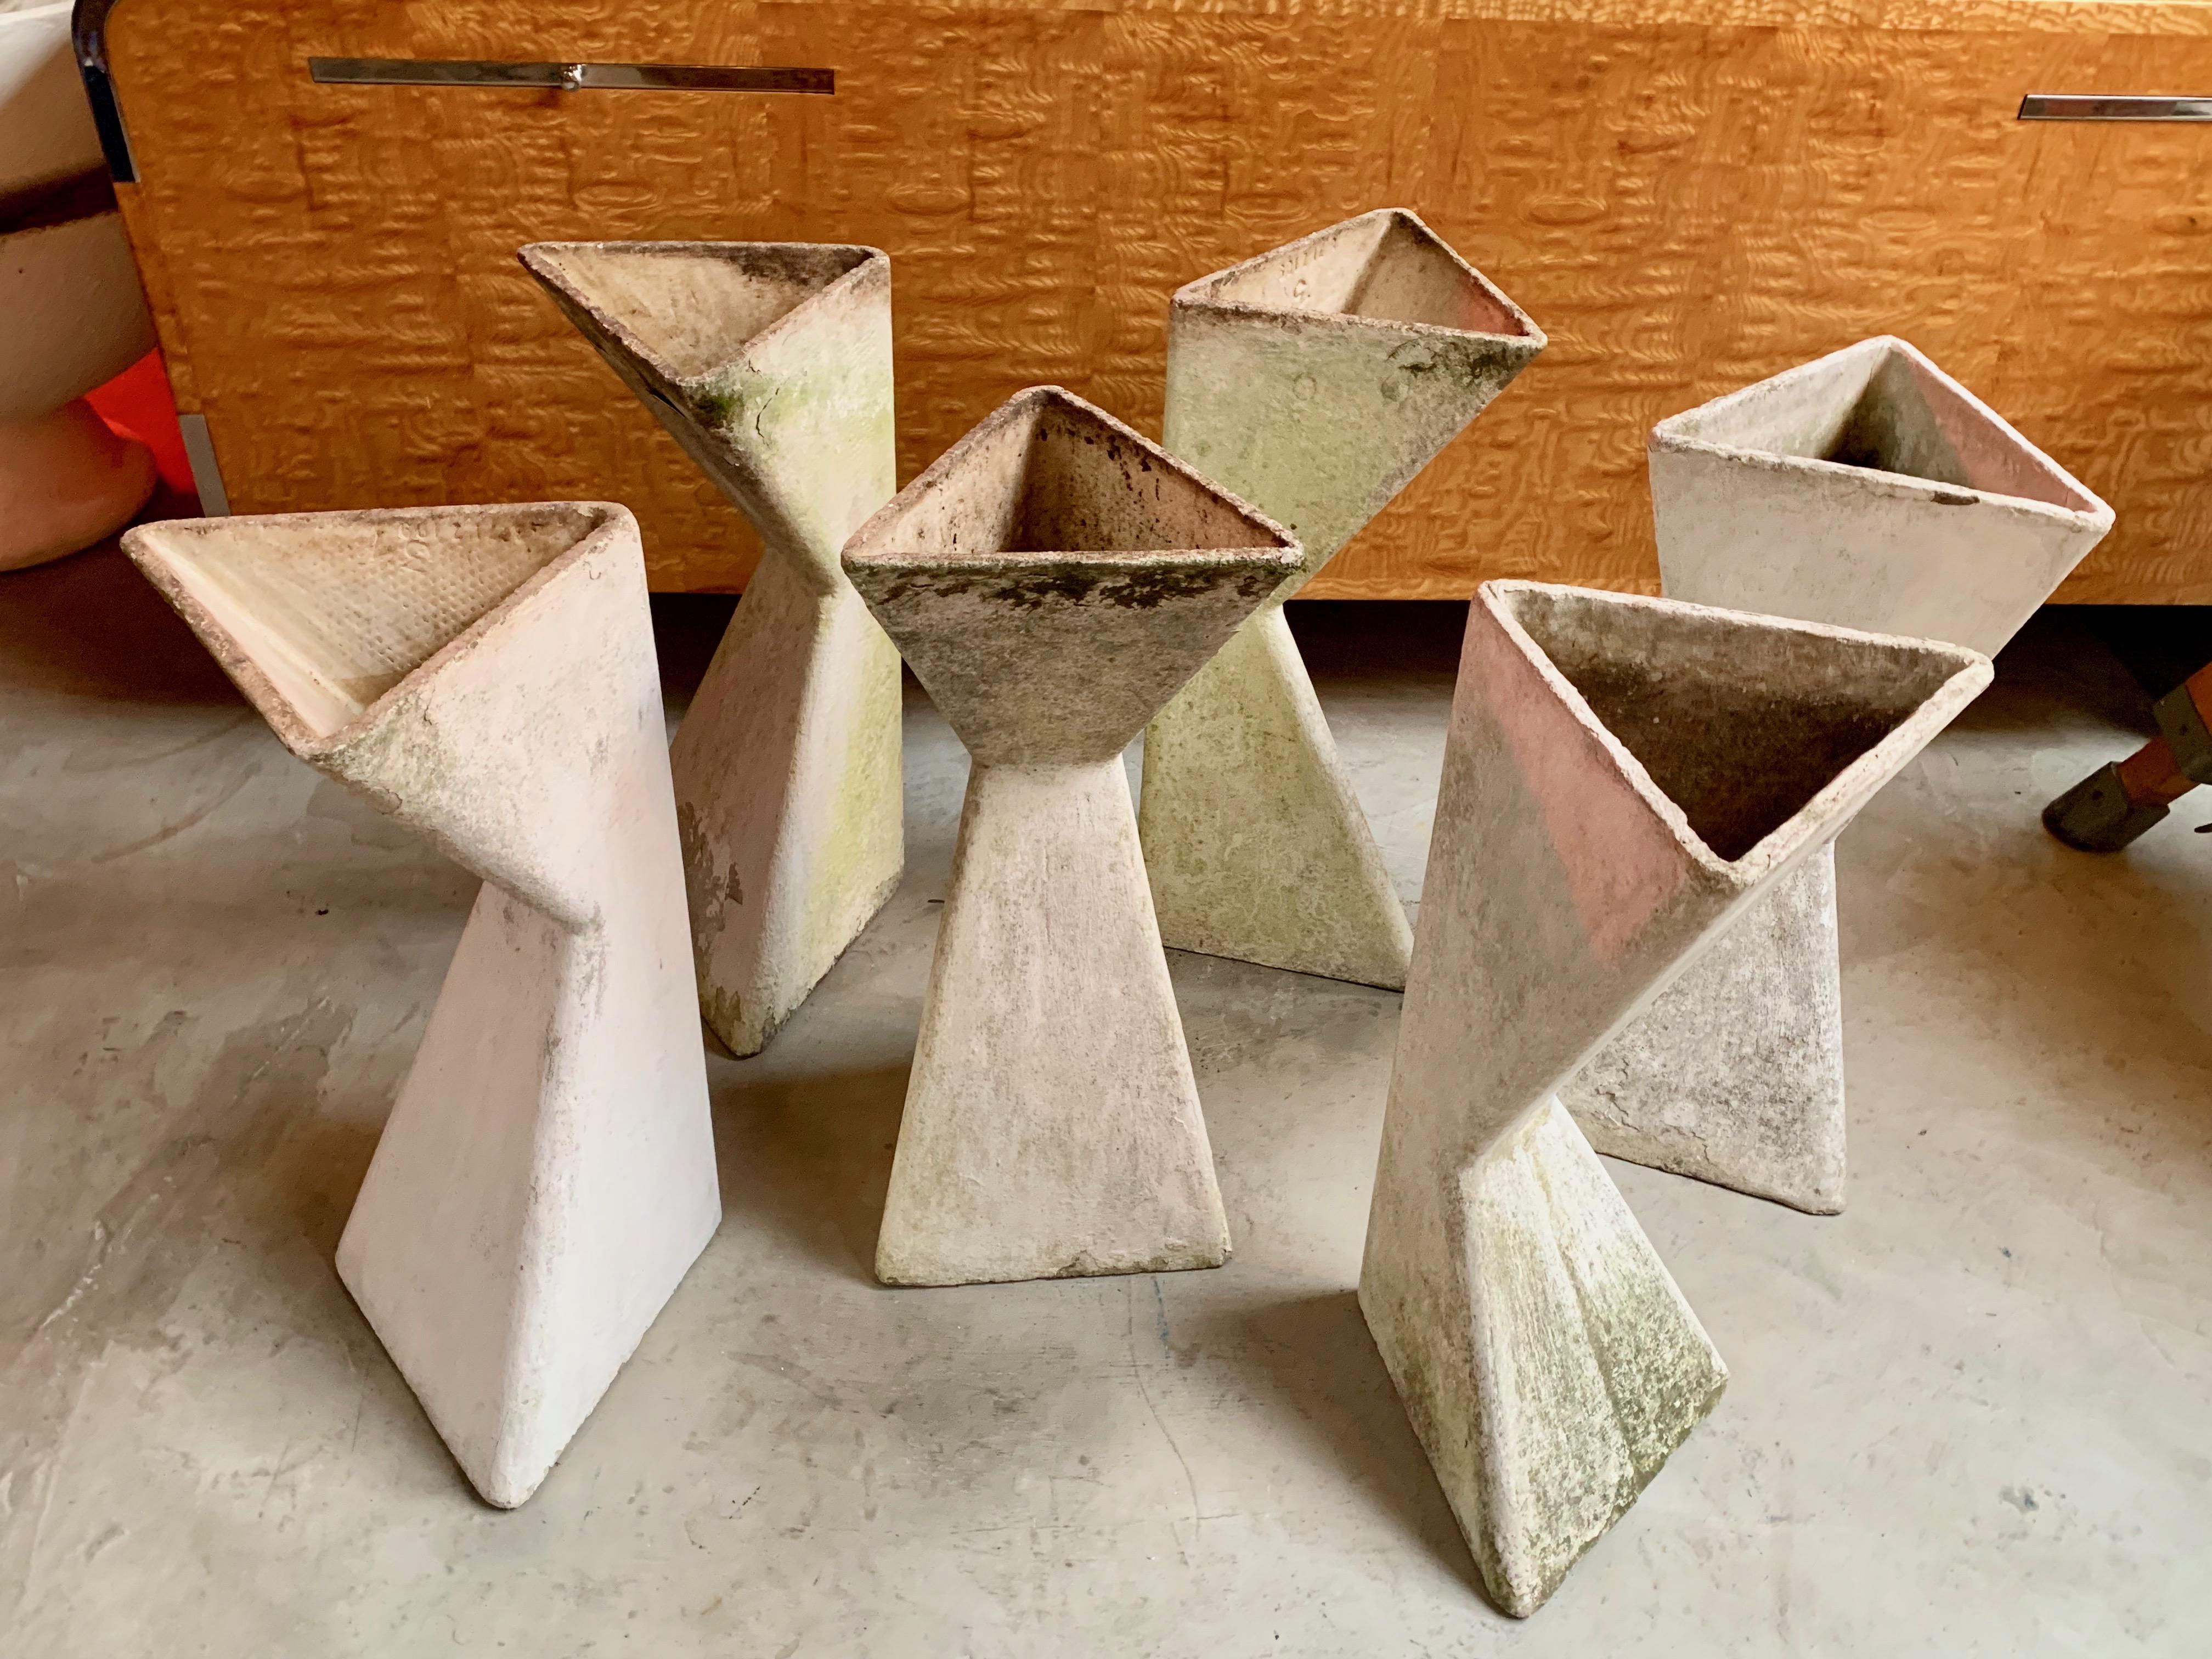 Extremely rare concrete planters by Willy Guhl. Triangular shape and able to be planted right side up, or upside down. Drainage holes inside. They look great spread out as a sculptural installation or grouped together as a circular unit. 6